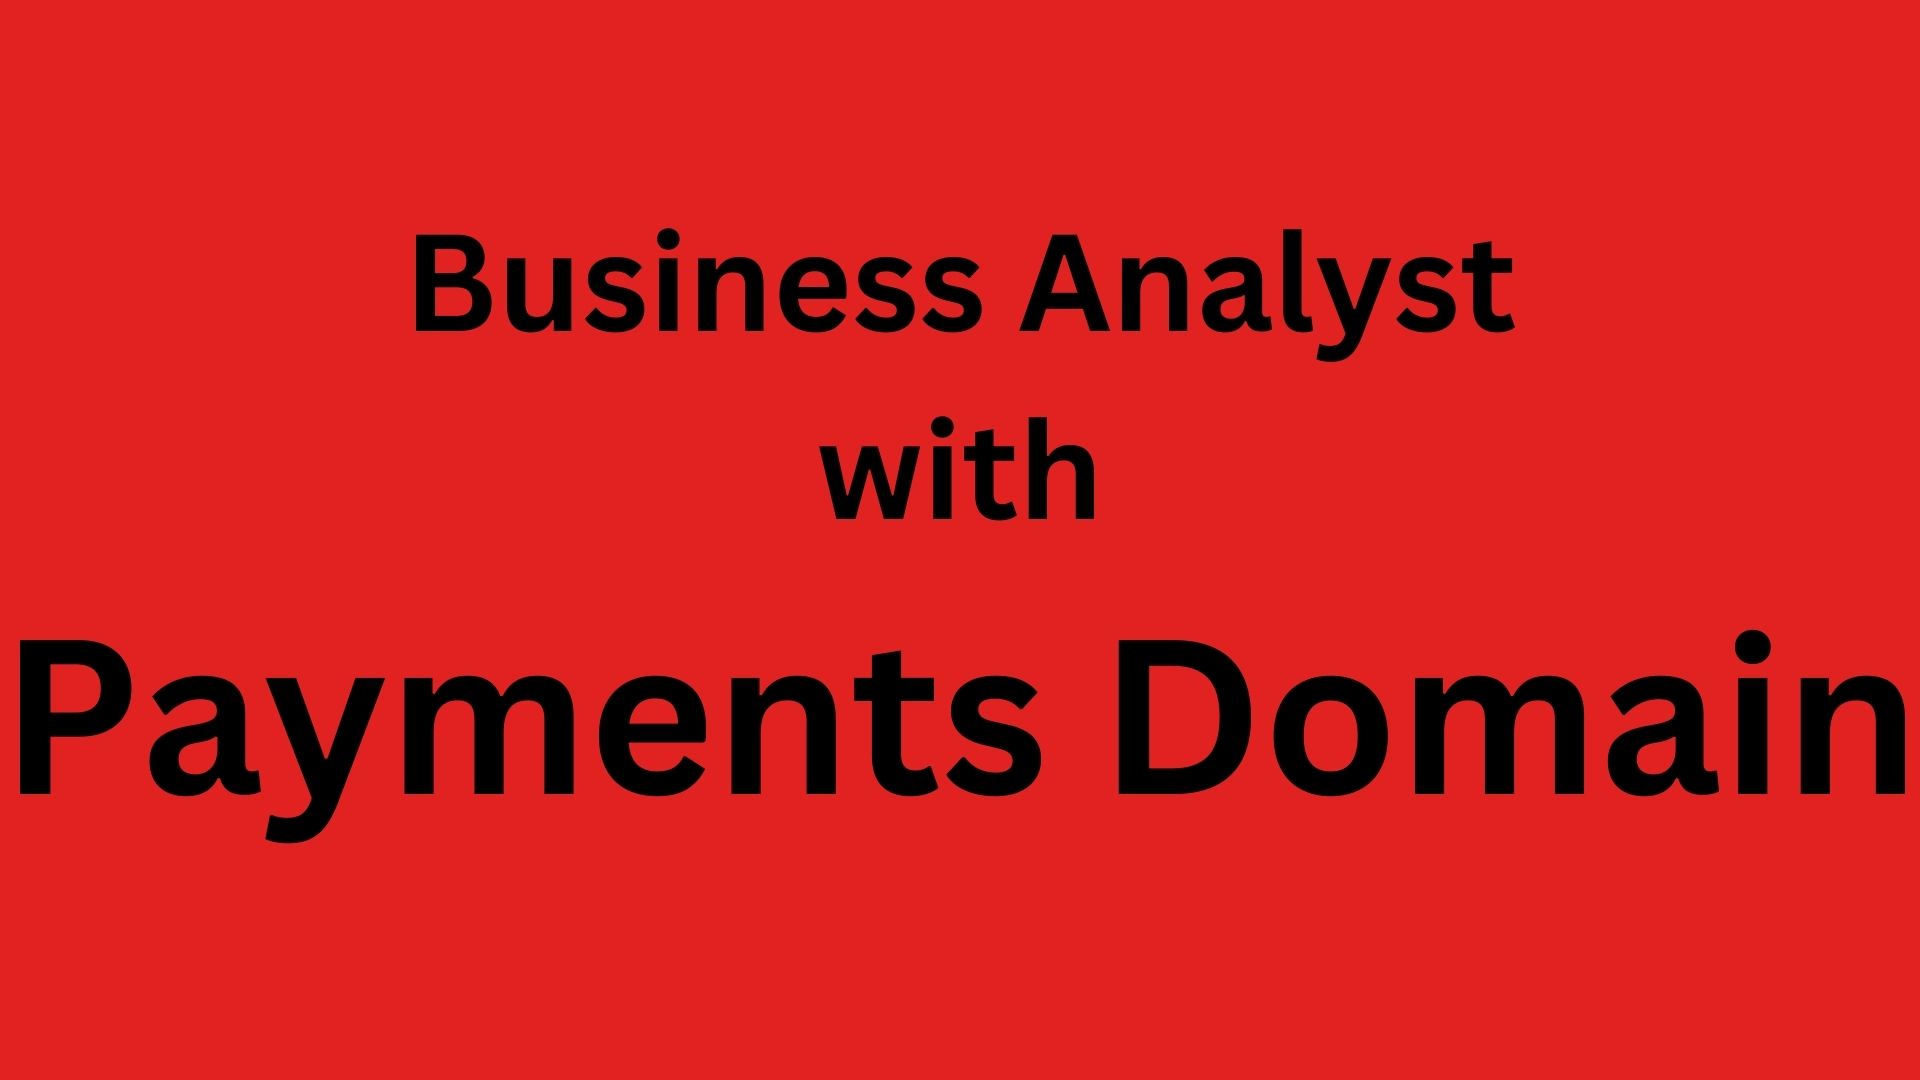 Business Analyst with Payments Domain 